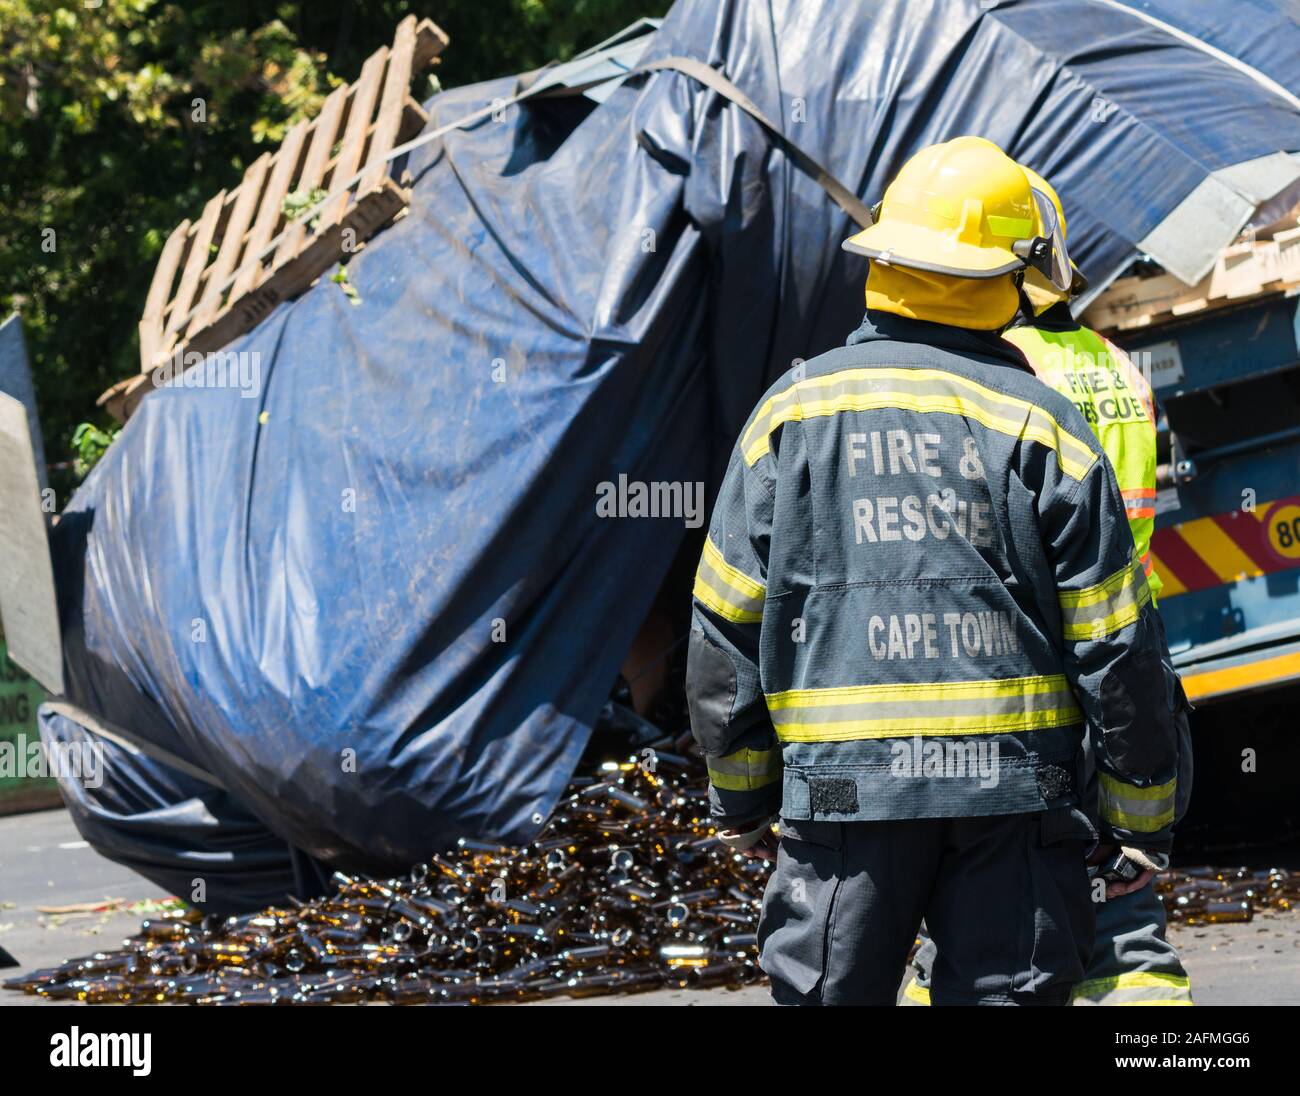 firemen, firefighters, emergency workers, emergency responders at a road accident scene where a truck or lorry has lost its load in Cape Town Stock Photo